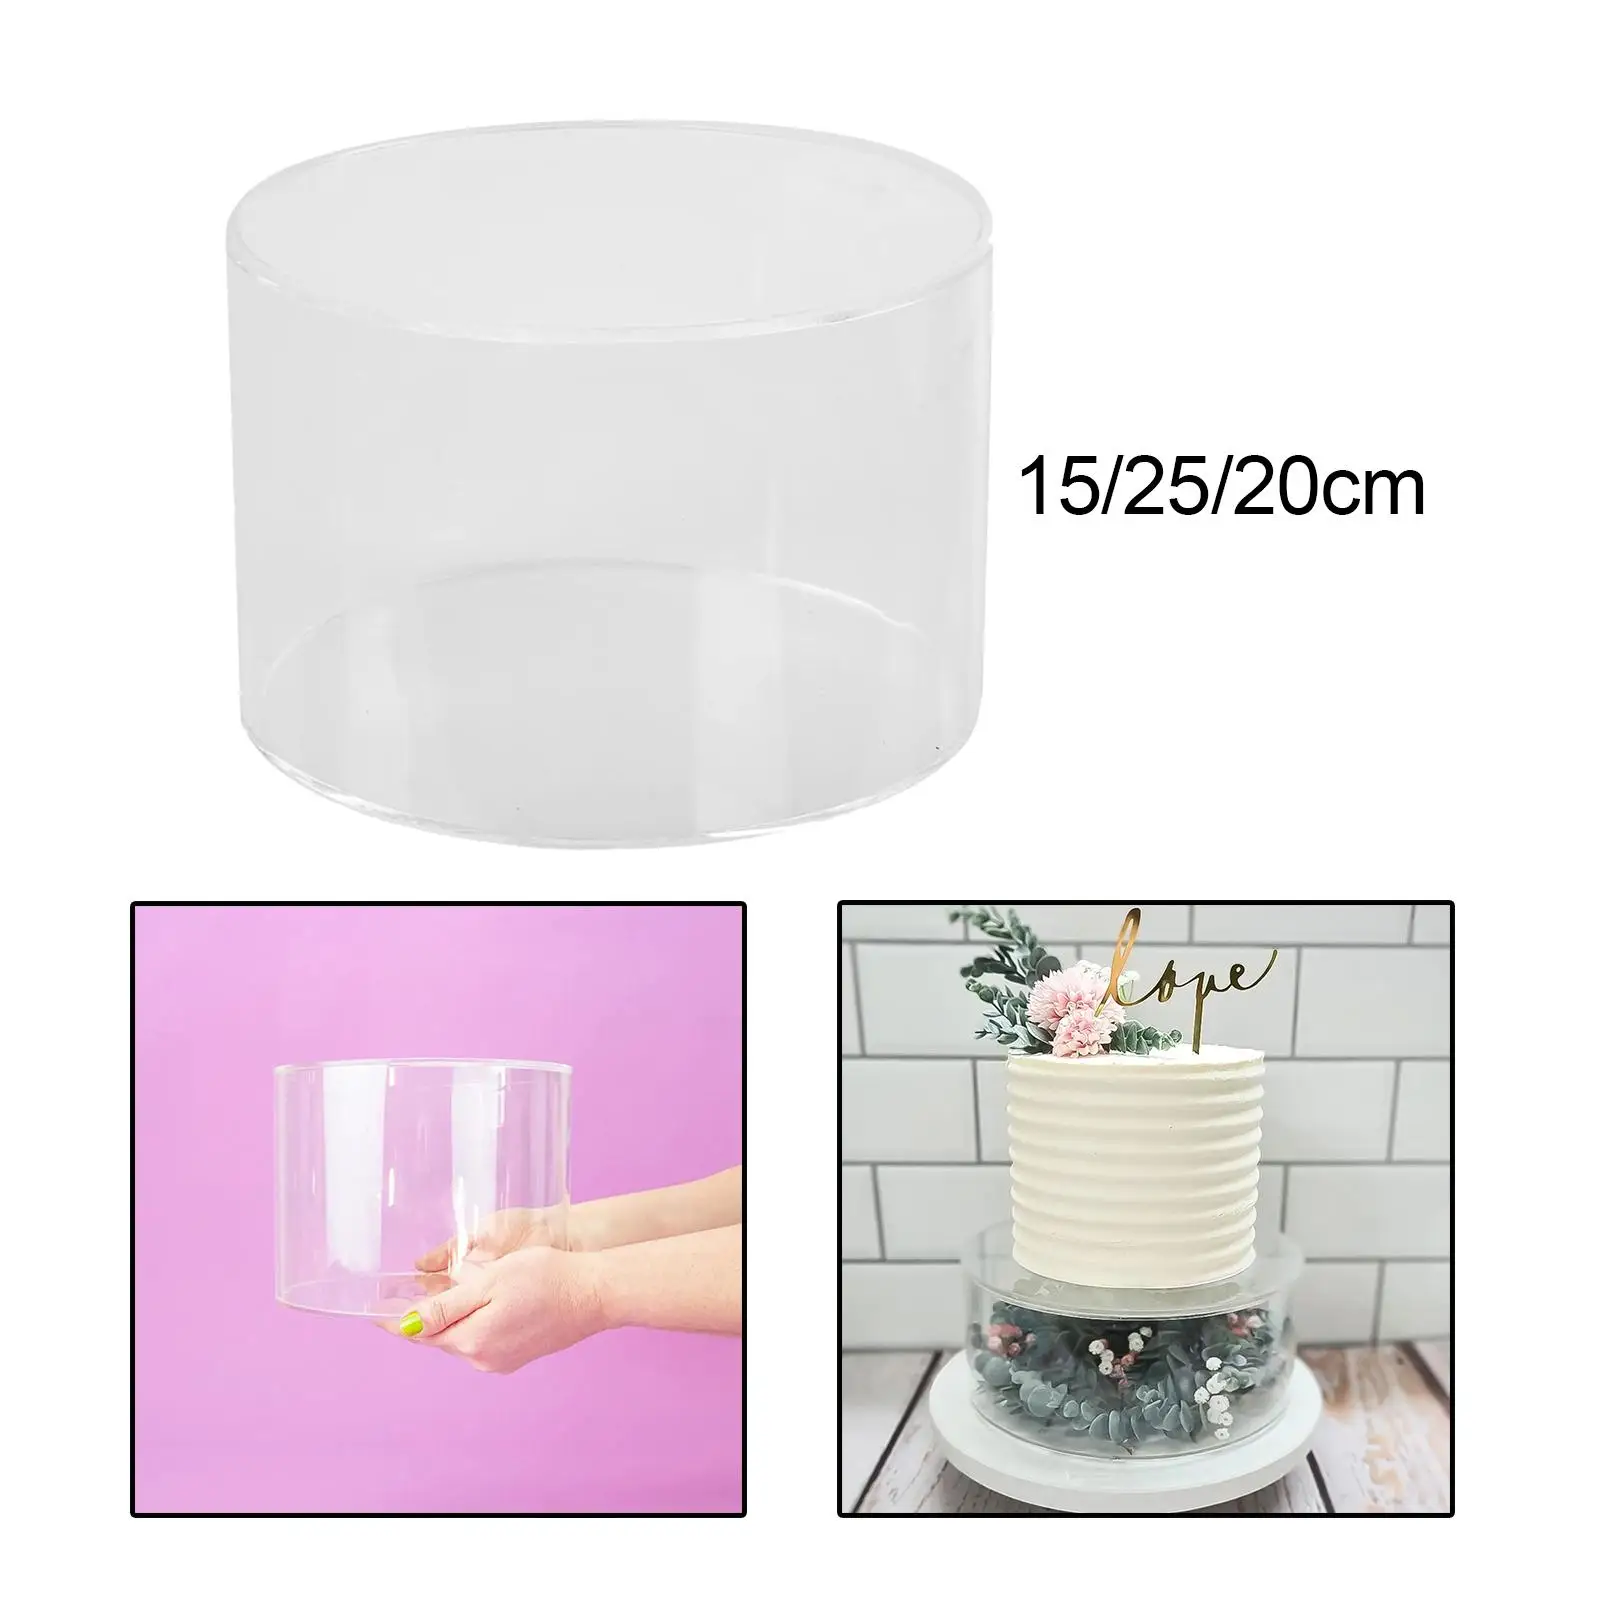 Acrylic Cylinder Display Riser Round Decoration Base Cake Tier for Birthday